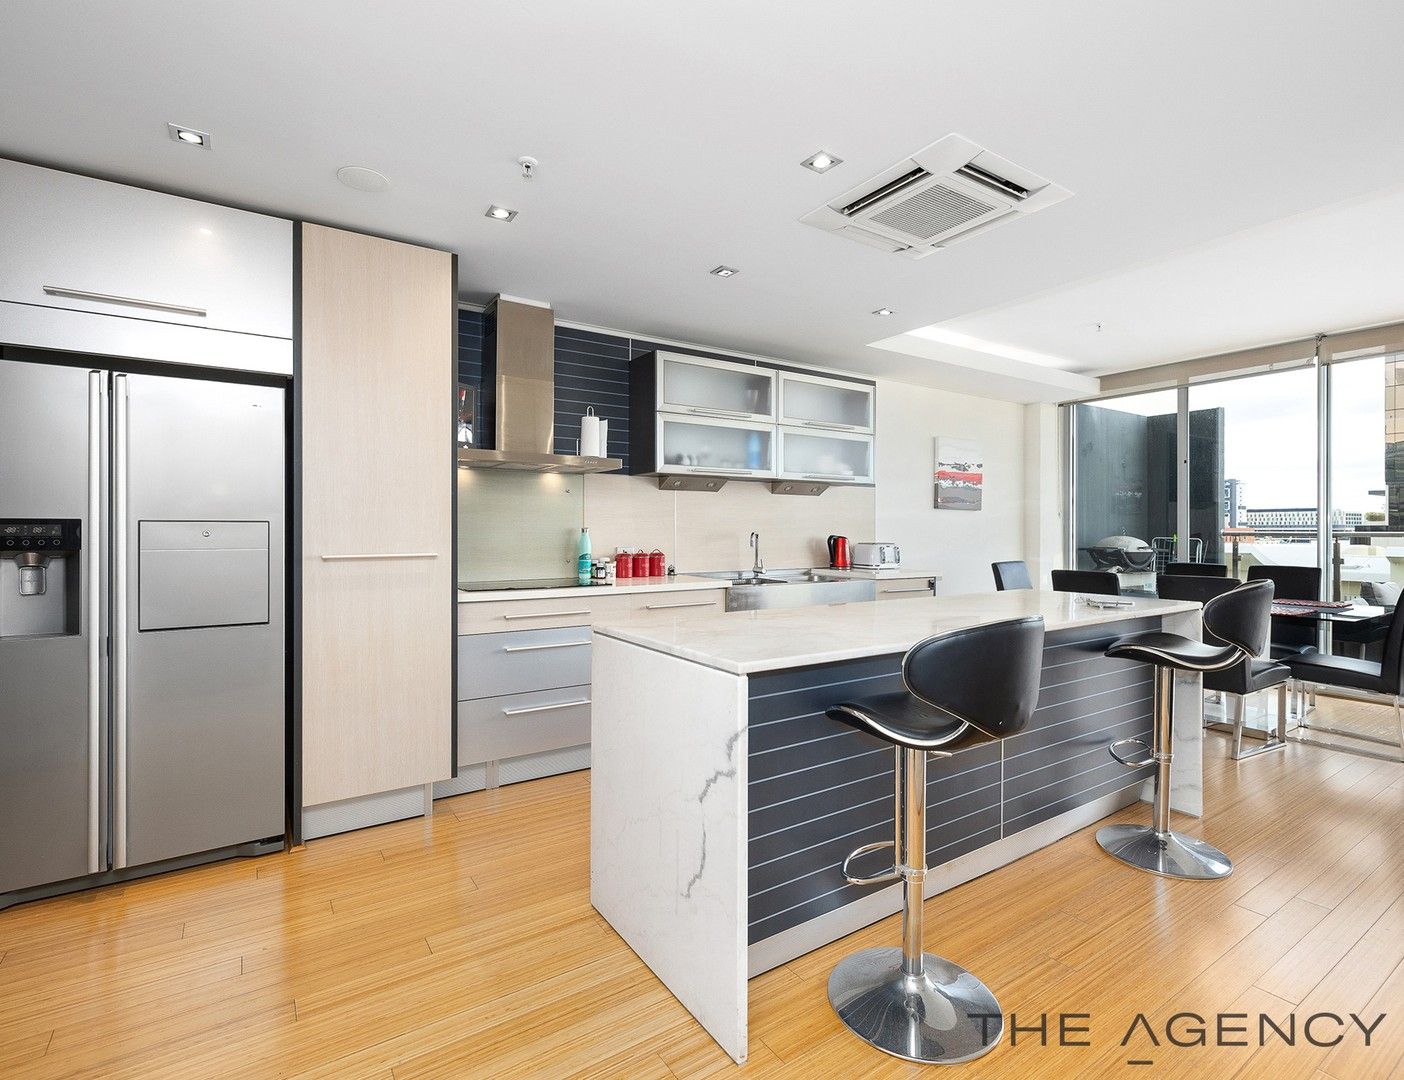 2 bedrooms Apartment / Unit / Flat in 60/22 St Georges Terrace PERTH WA, 6000